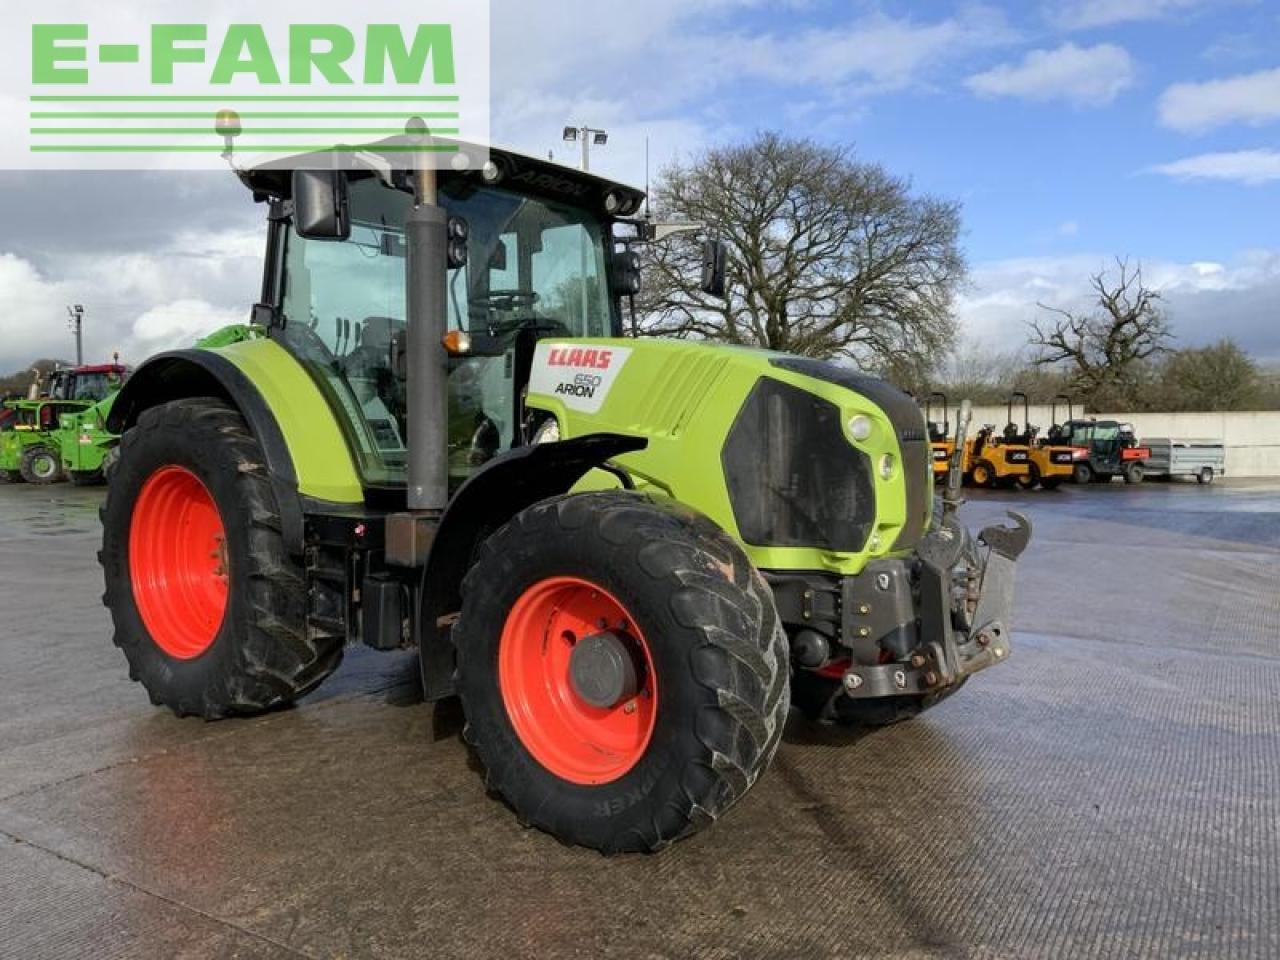 Tractor CLAAS 650 arion tractor (st15805)